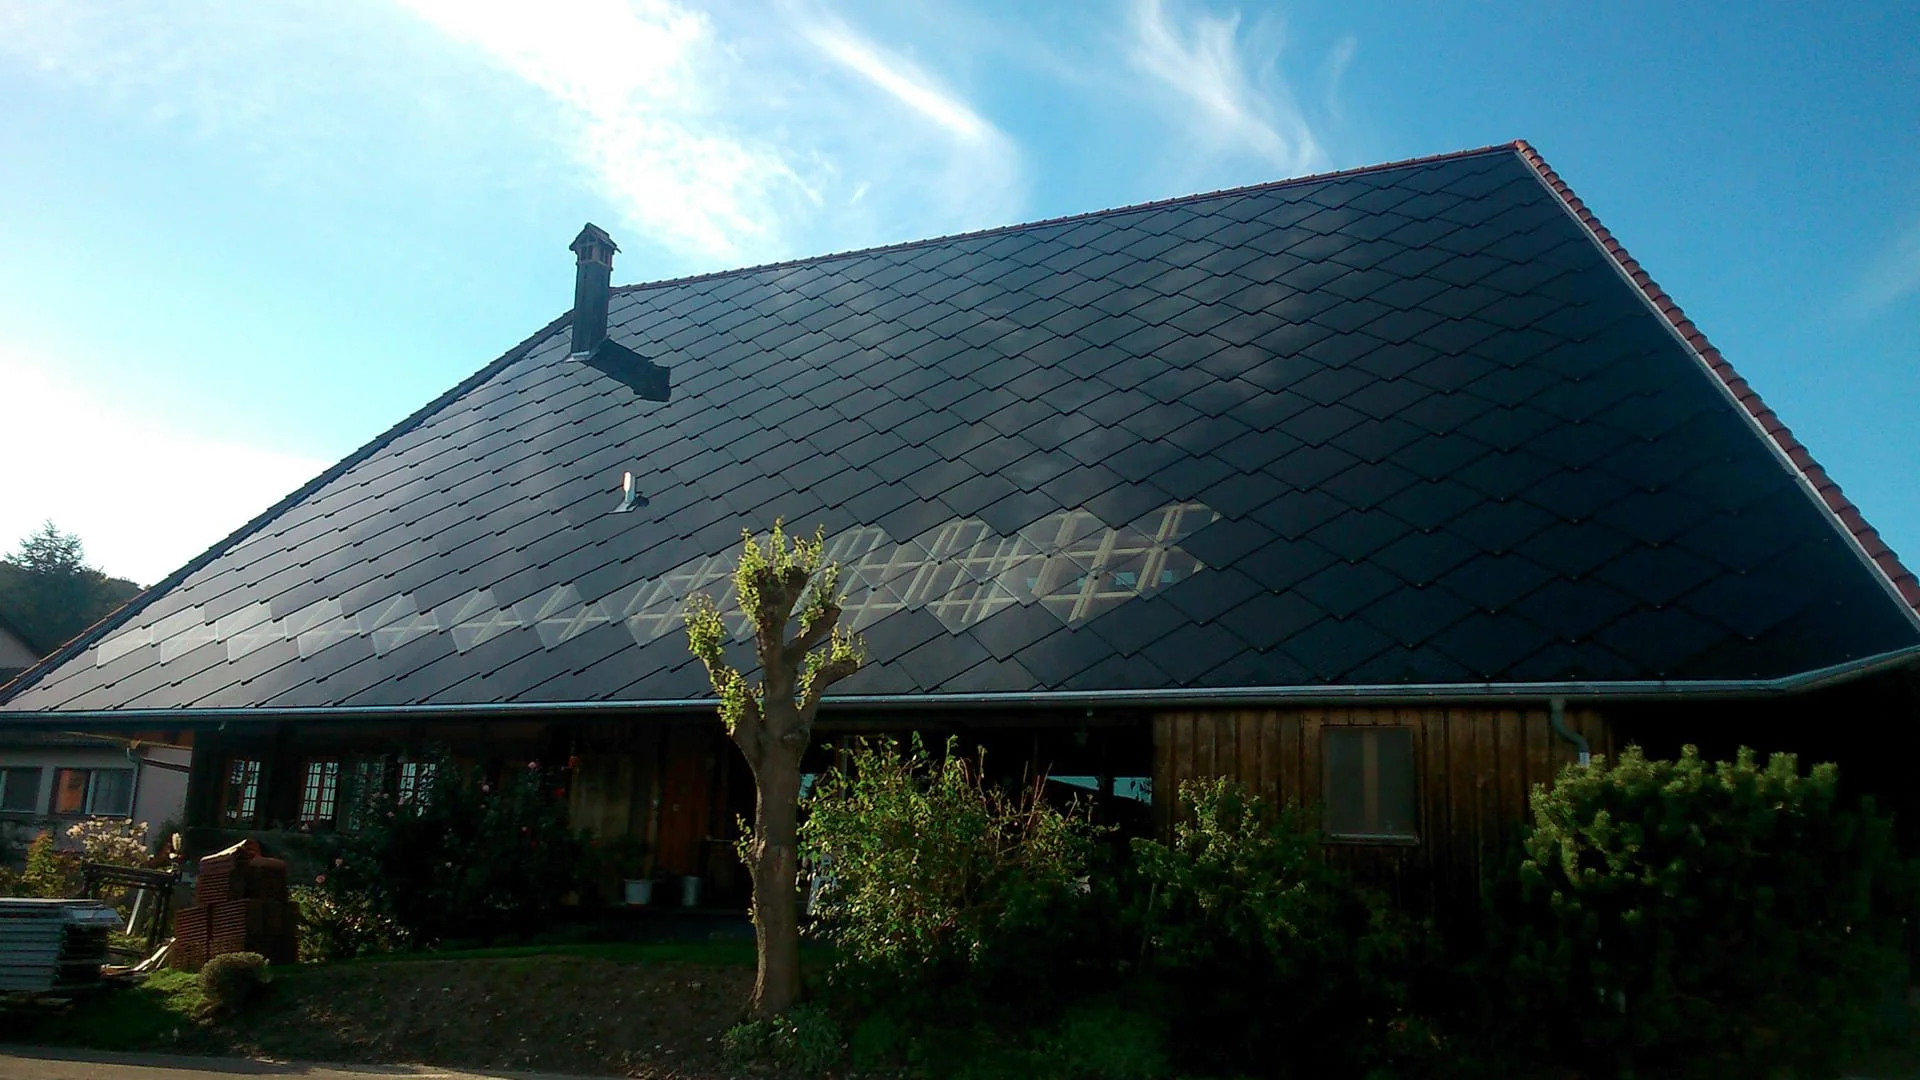 Sunstyle solar tiles installed on a roof with skylights